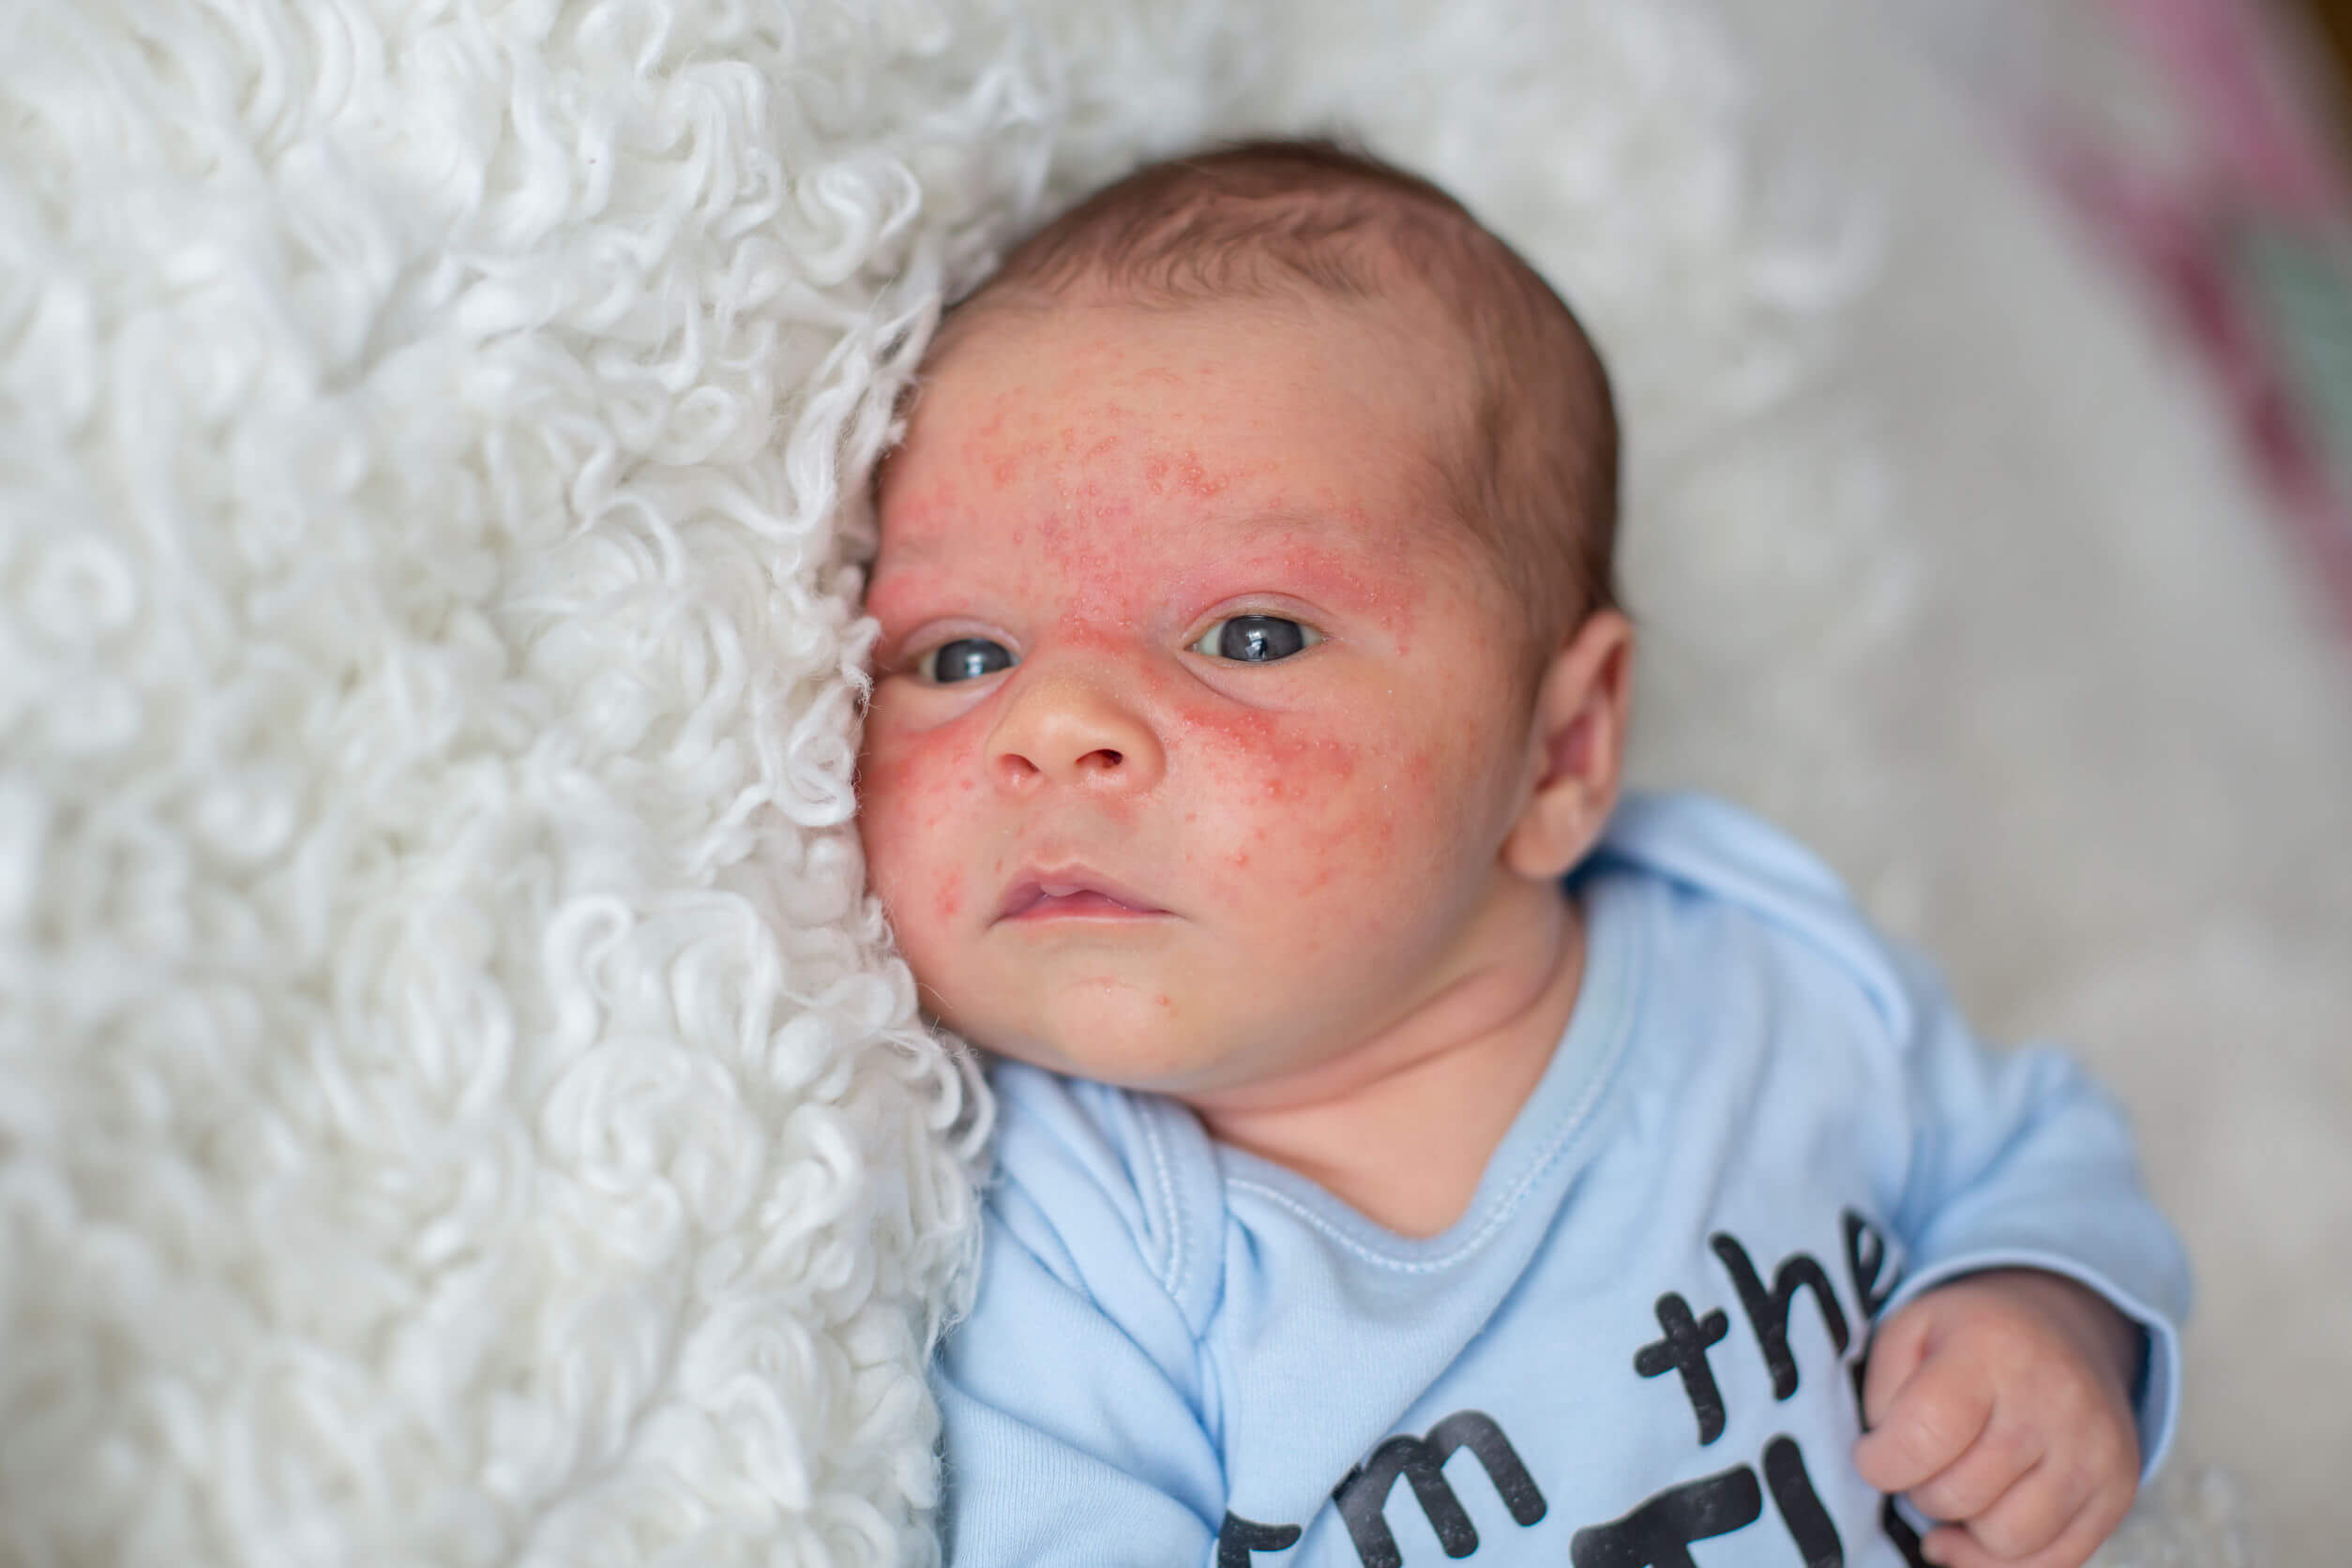 A baby with a rash on his face.